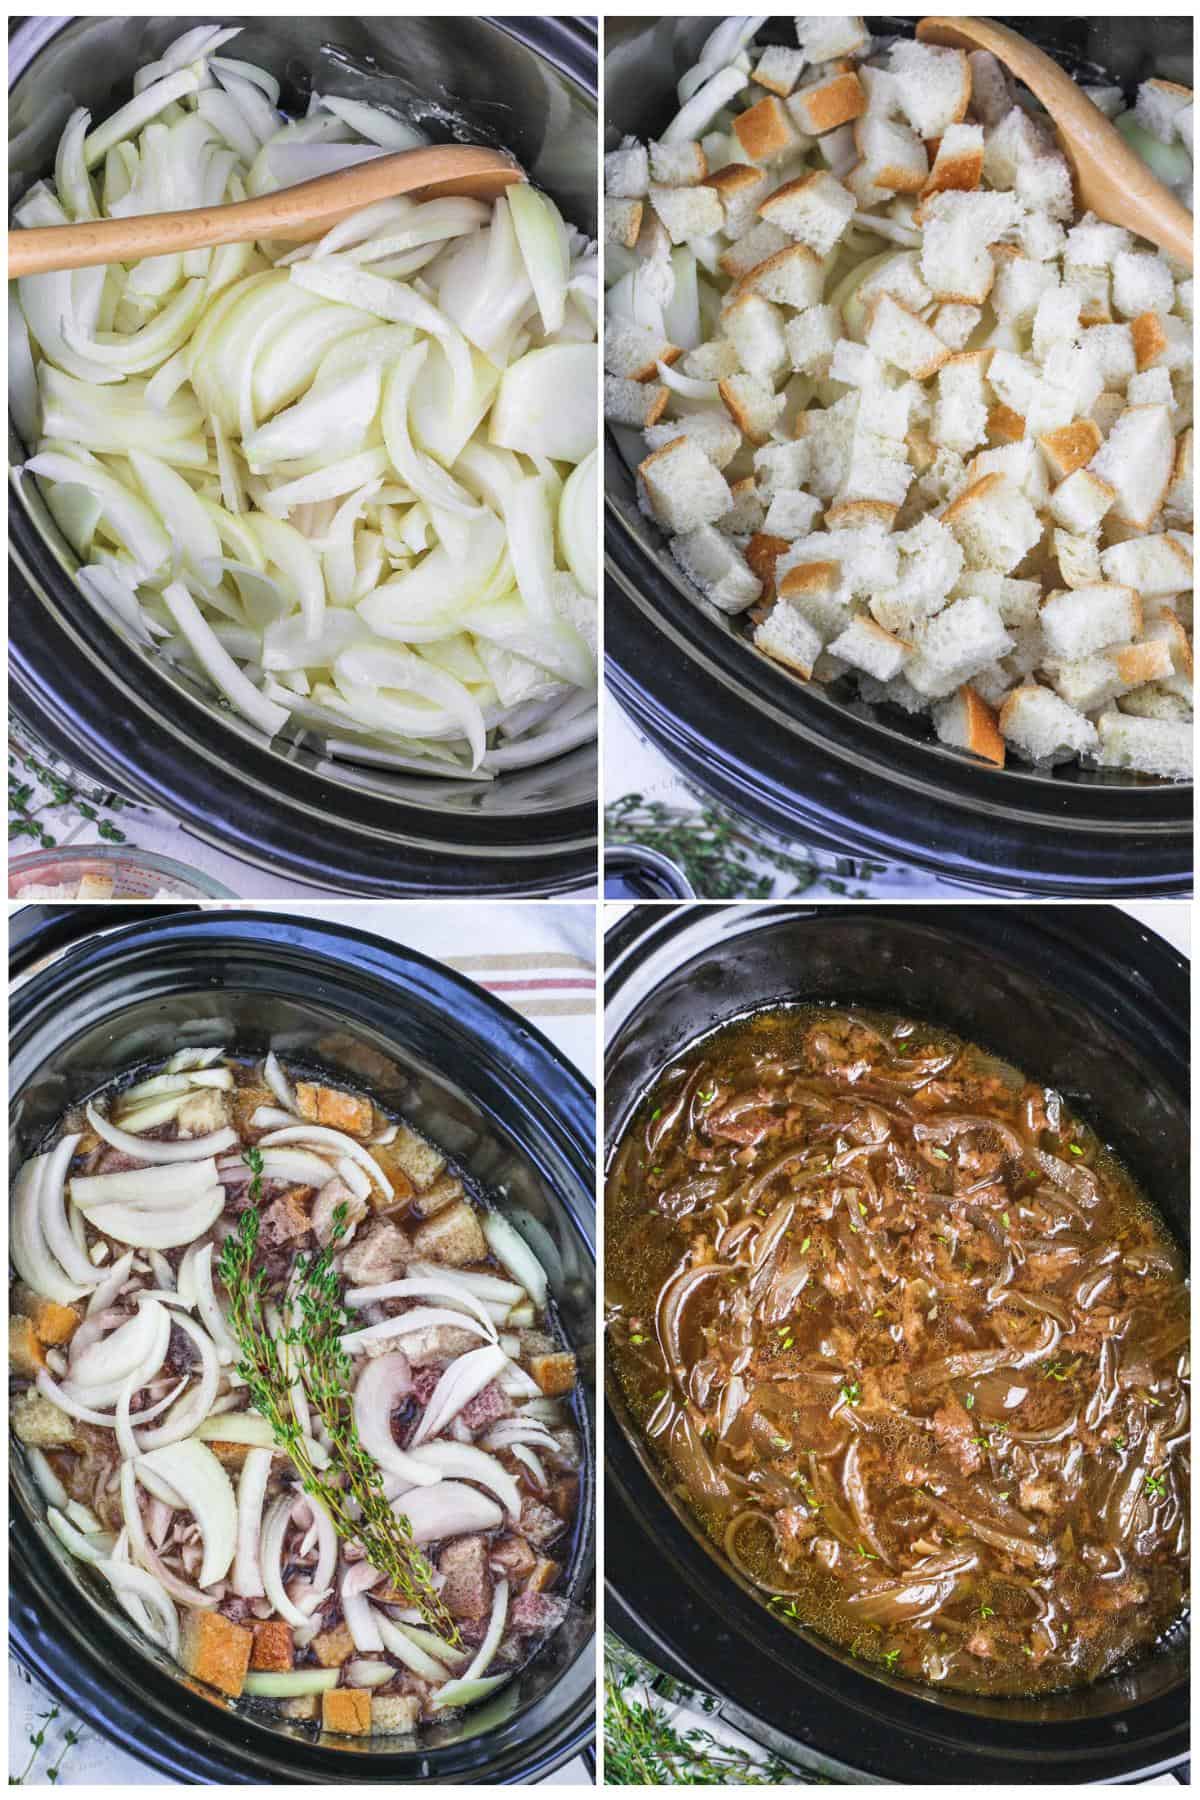 process of adding ingredients to crock pot to make Crockpot French Onion Soup